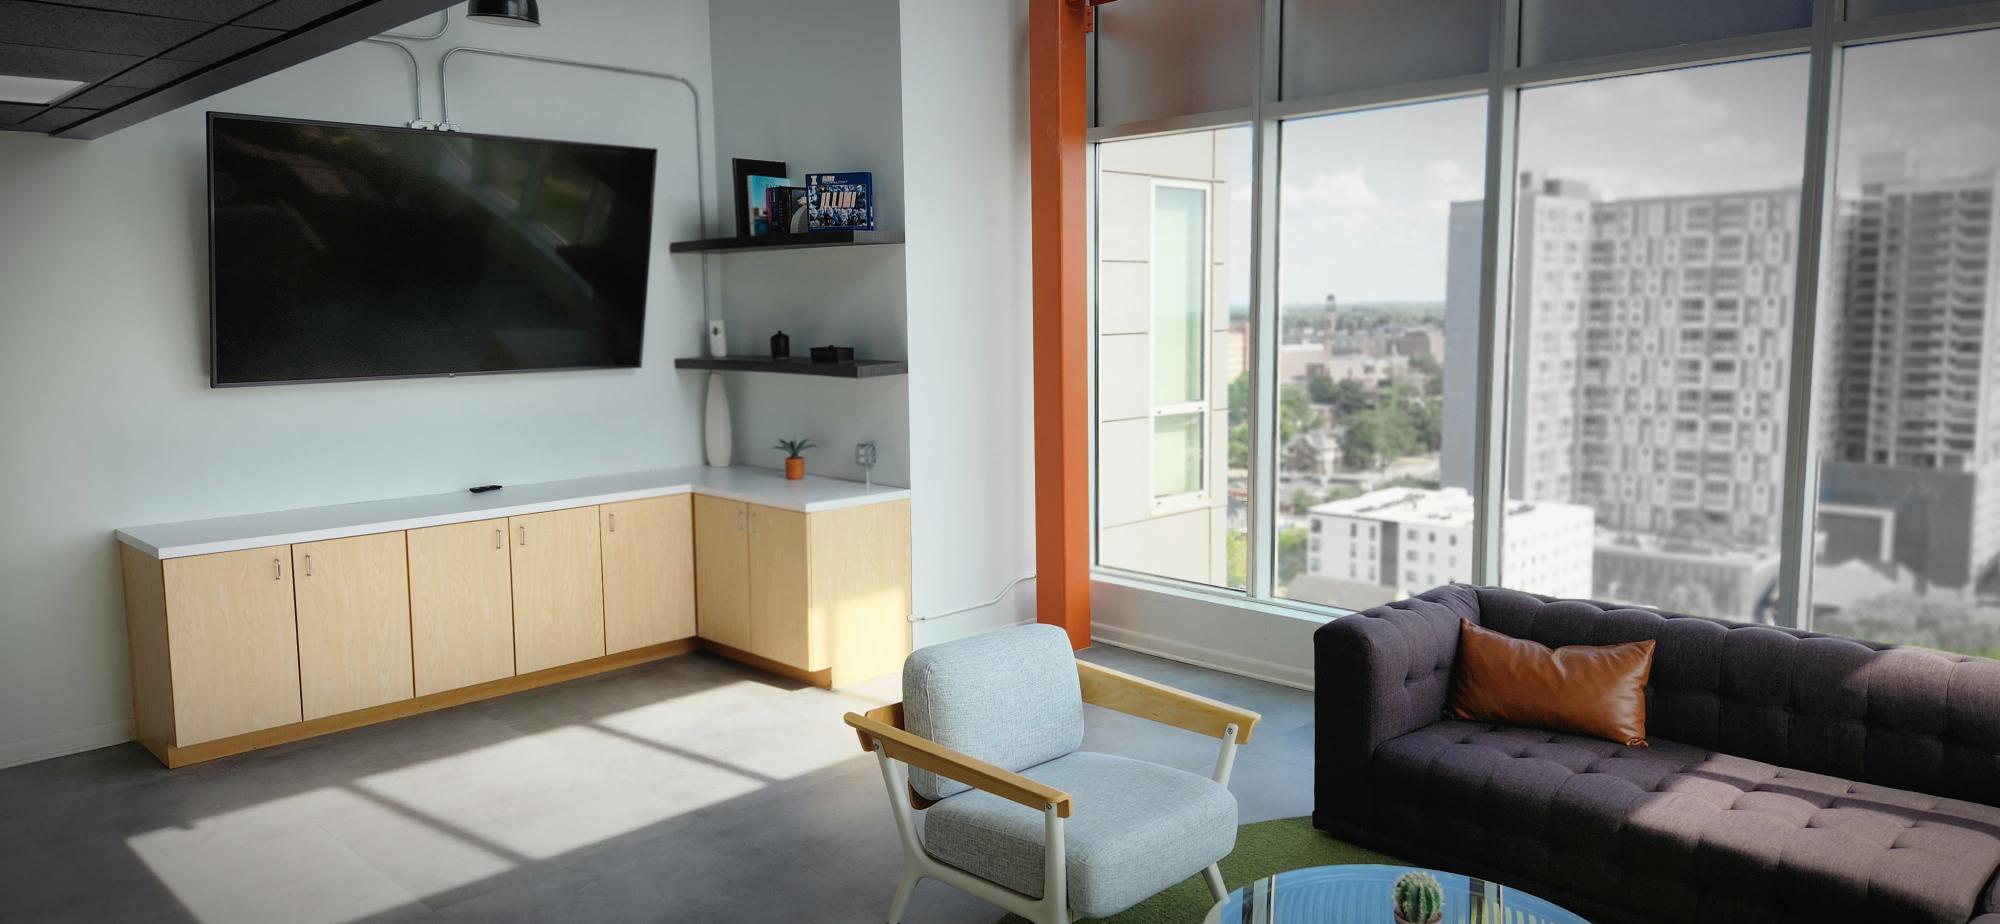 large community room with wall-mounted TV, large windows and modern seating